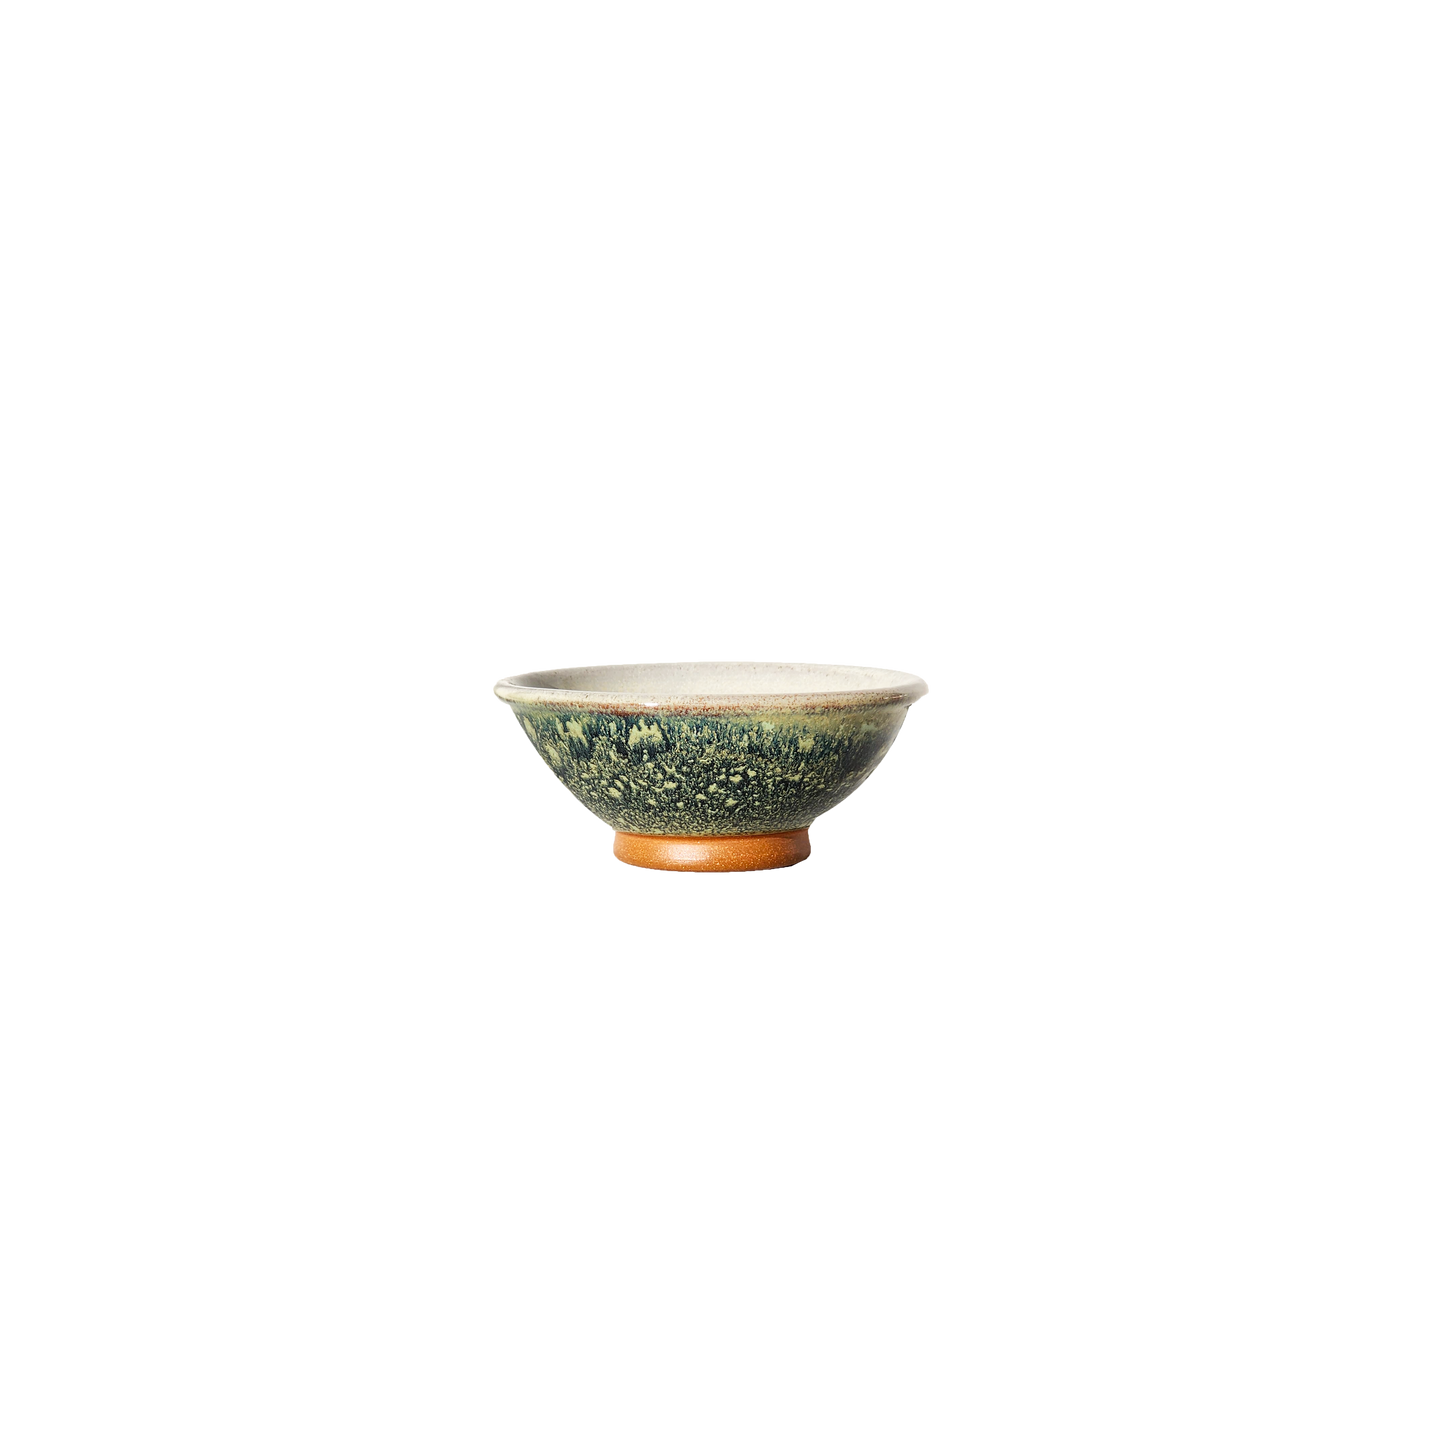 Image: Bring the beauty of nature to your table with this dark green sugar bowl. Holds 4 ounces of sugar, offering both style and functionality to your tea or coffee station.